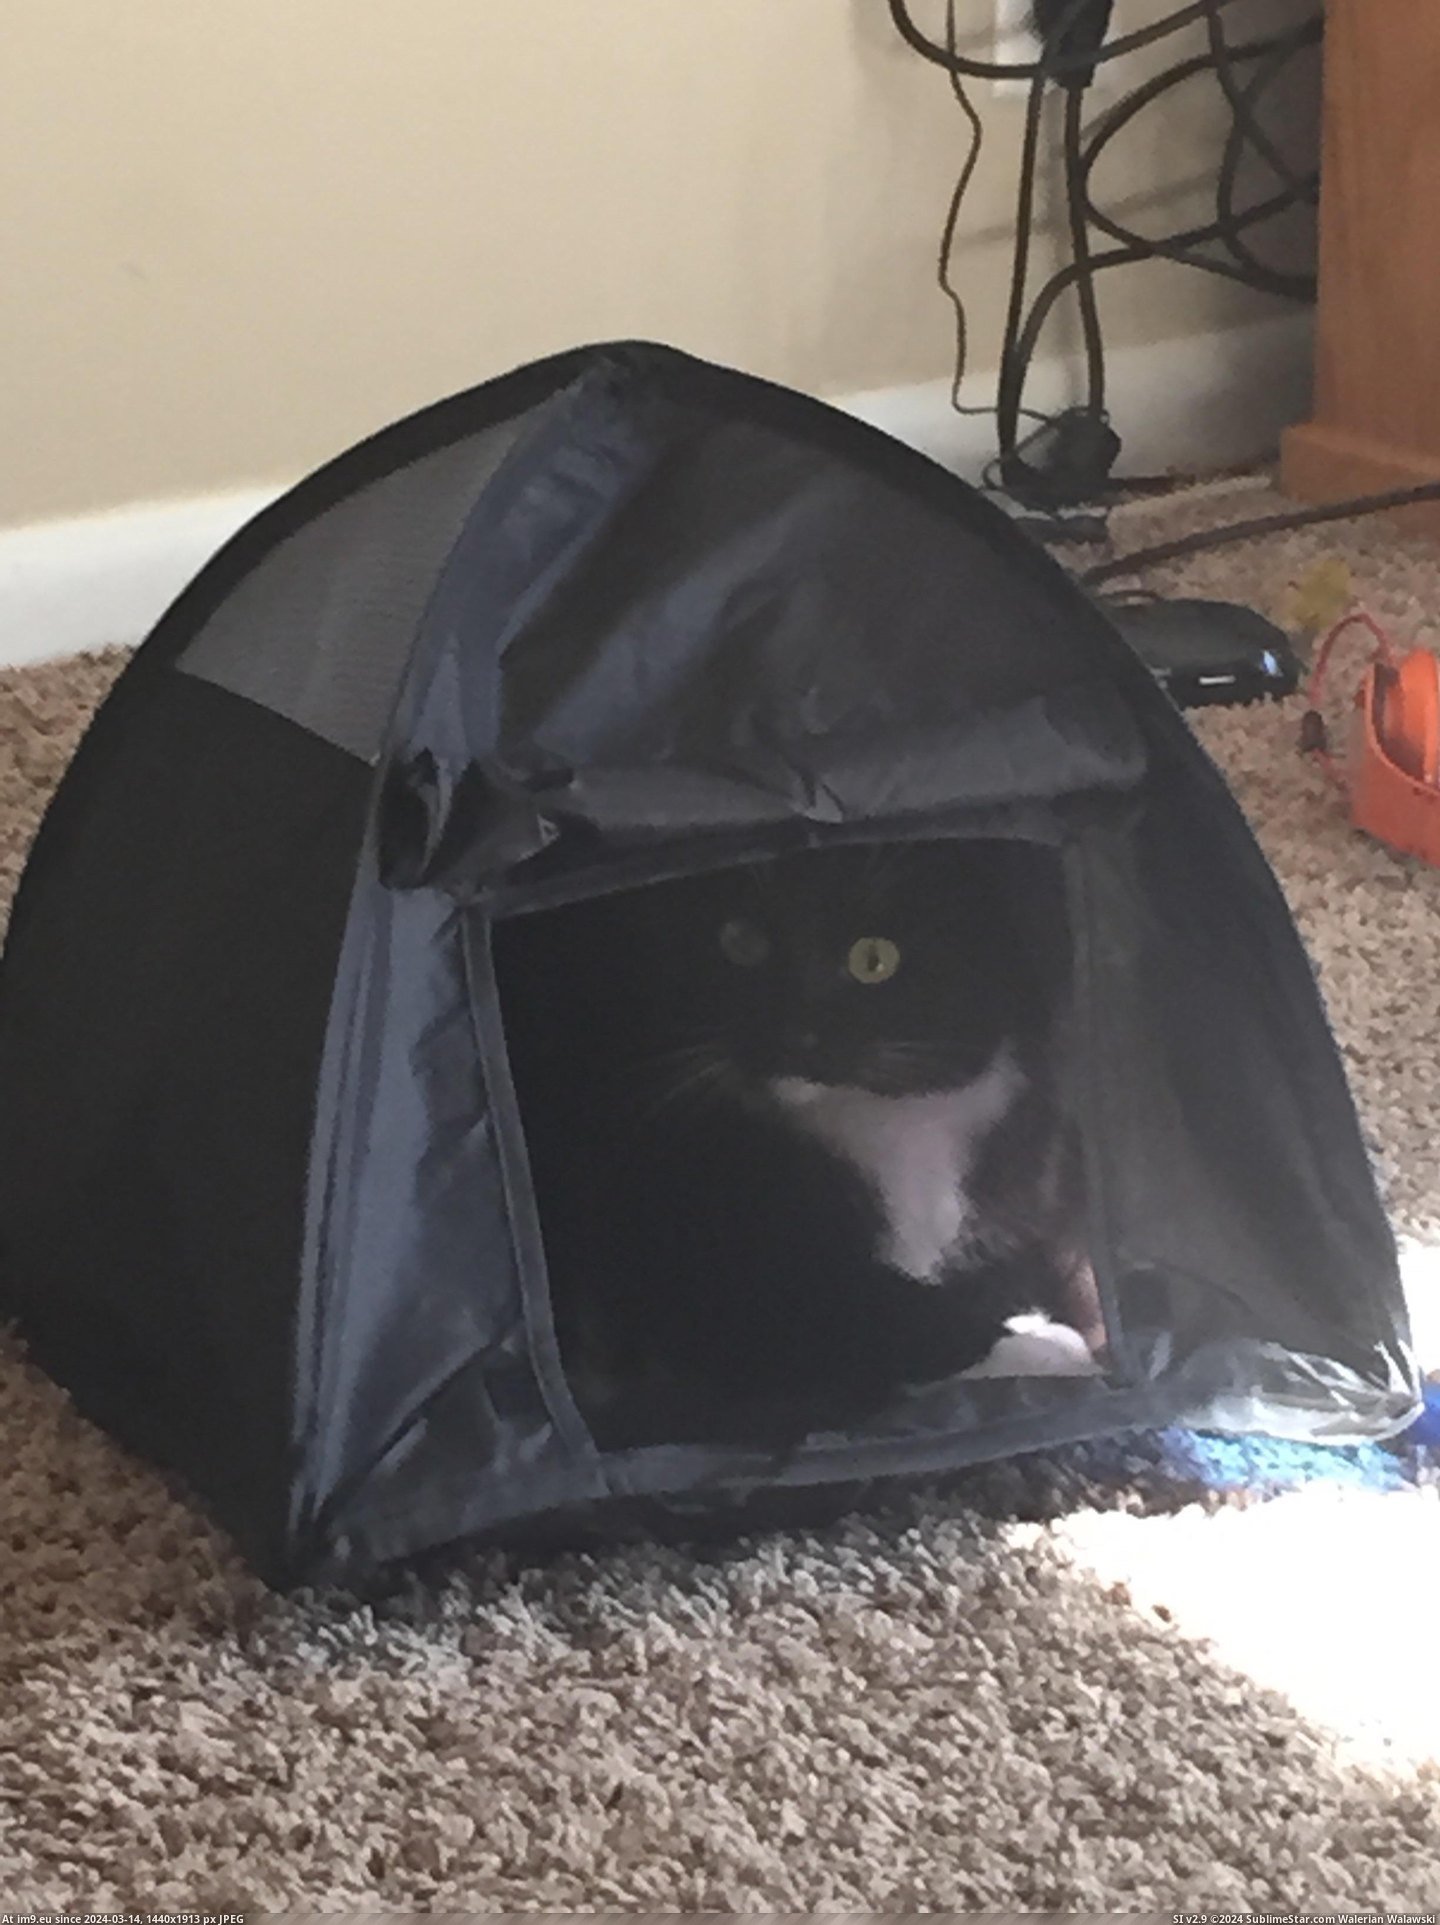 [Pics] My cat refuses to come out of the tent I bought her (in My r/PICS favs)